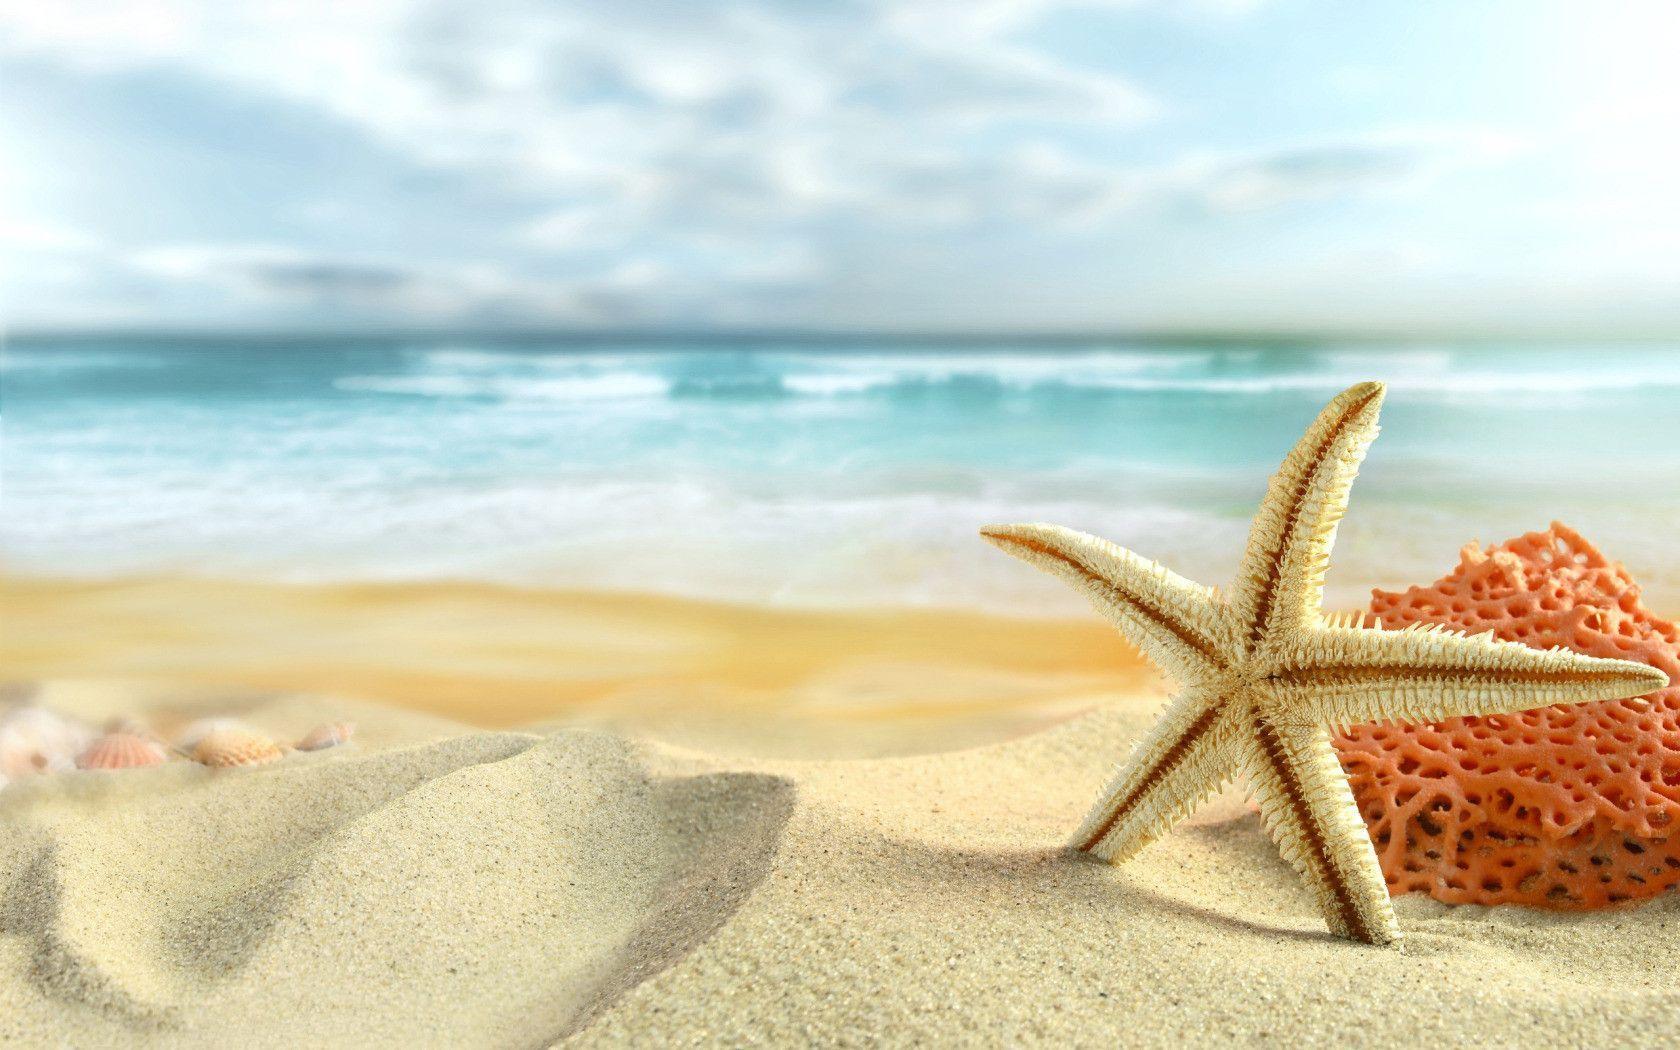 Starfish and Sea Shells on the Beach widescreen wallpaper. Wide